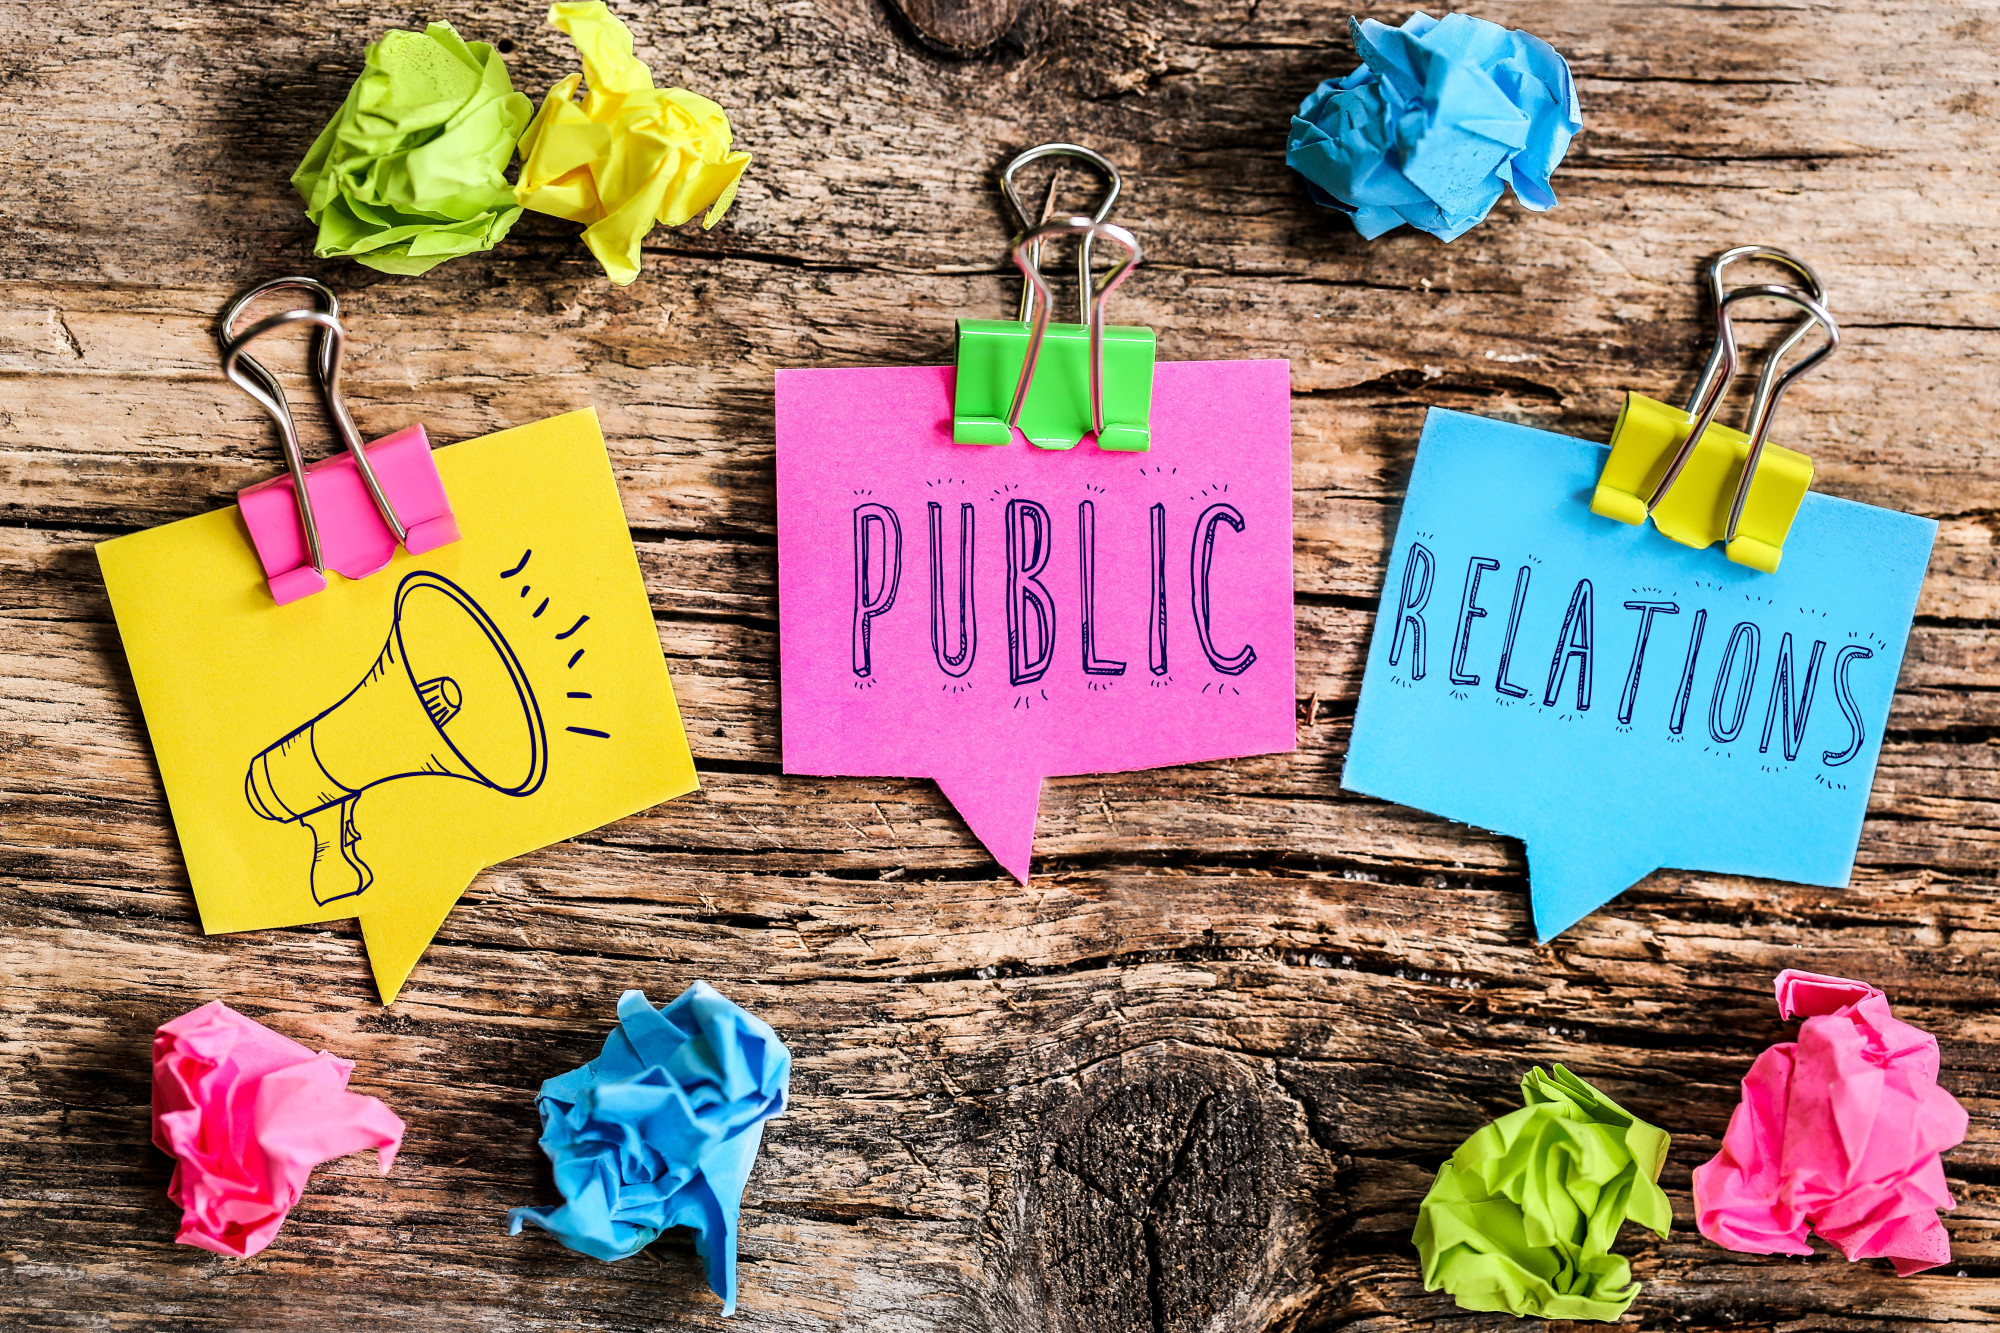 Public Relations Strategy